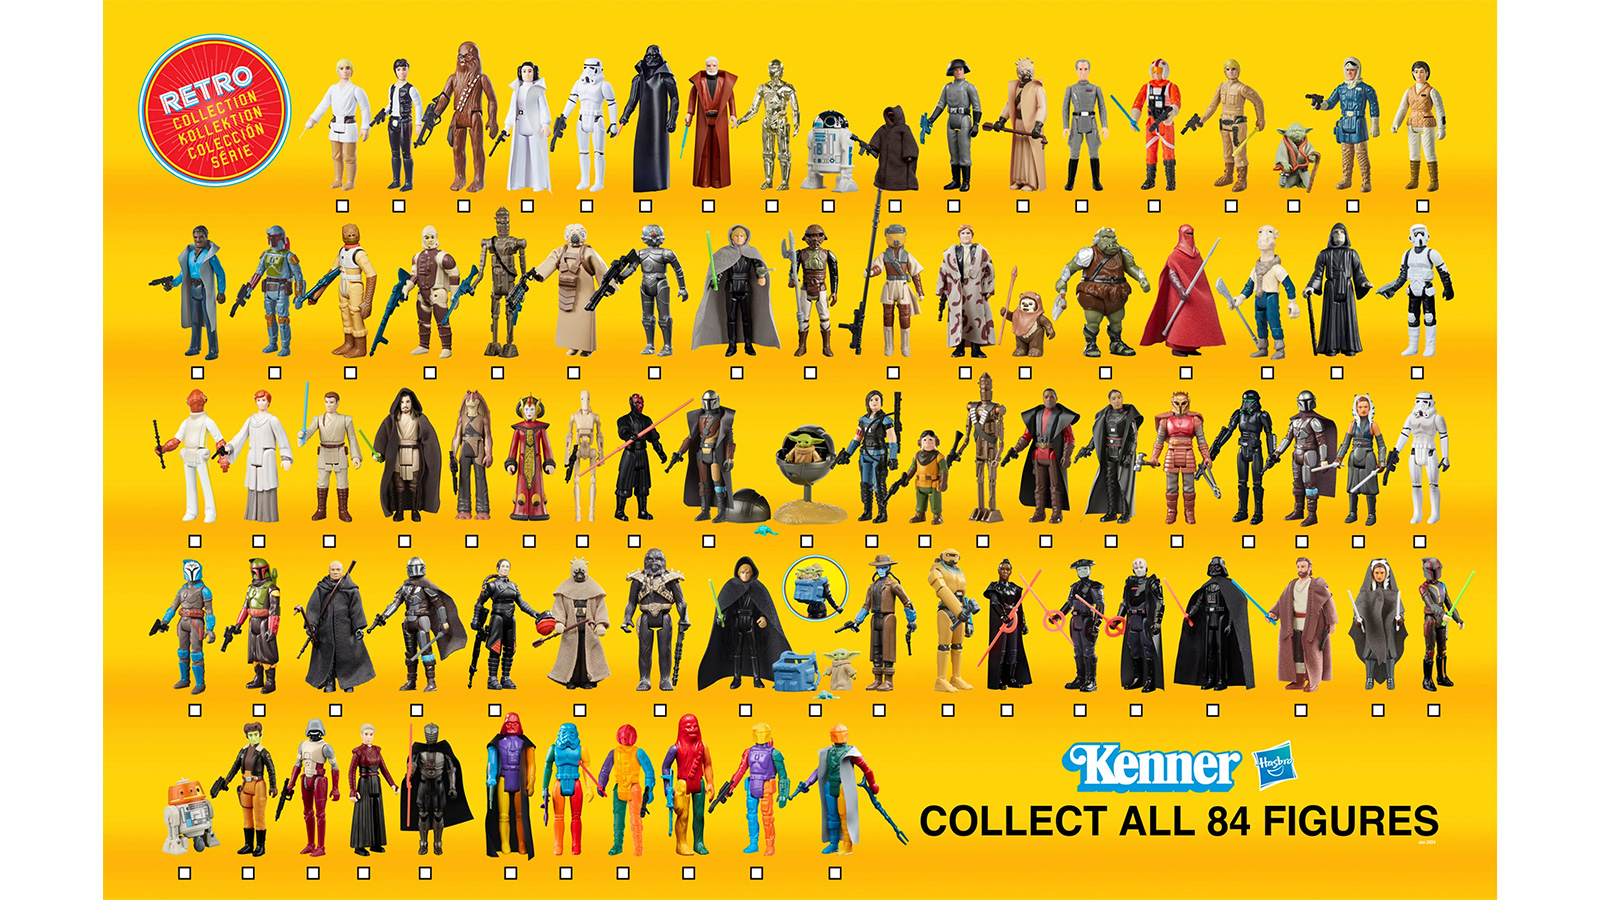 Steve Evans Returns To Hasbro’s Star Wars Franchise - Download HIs Retro Collection Checklist